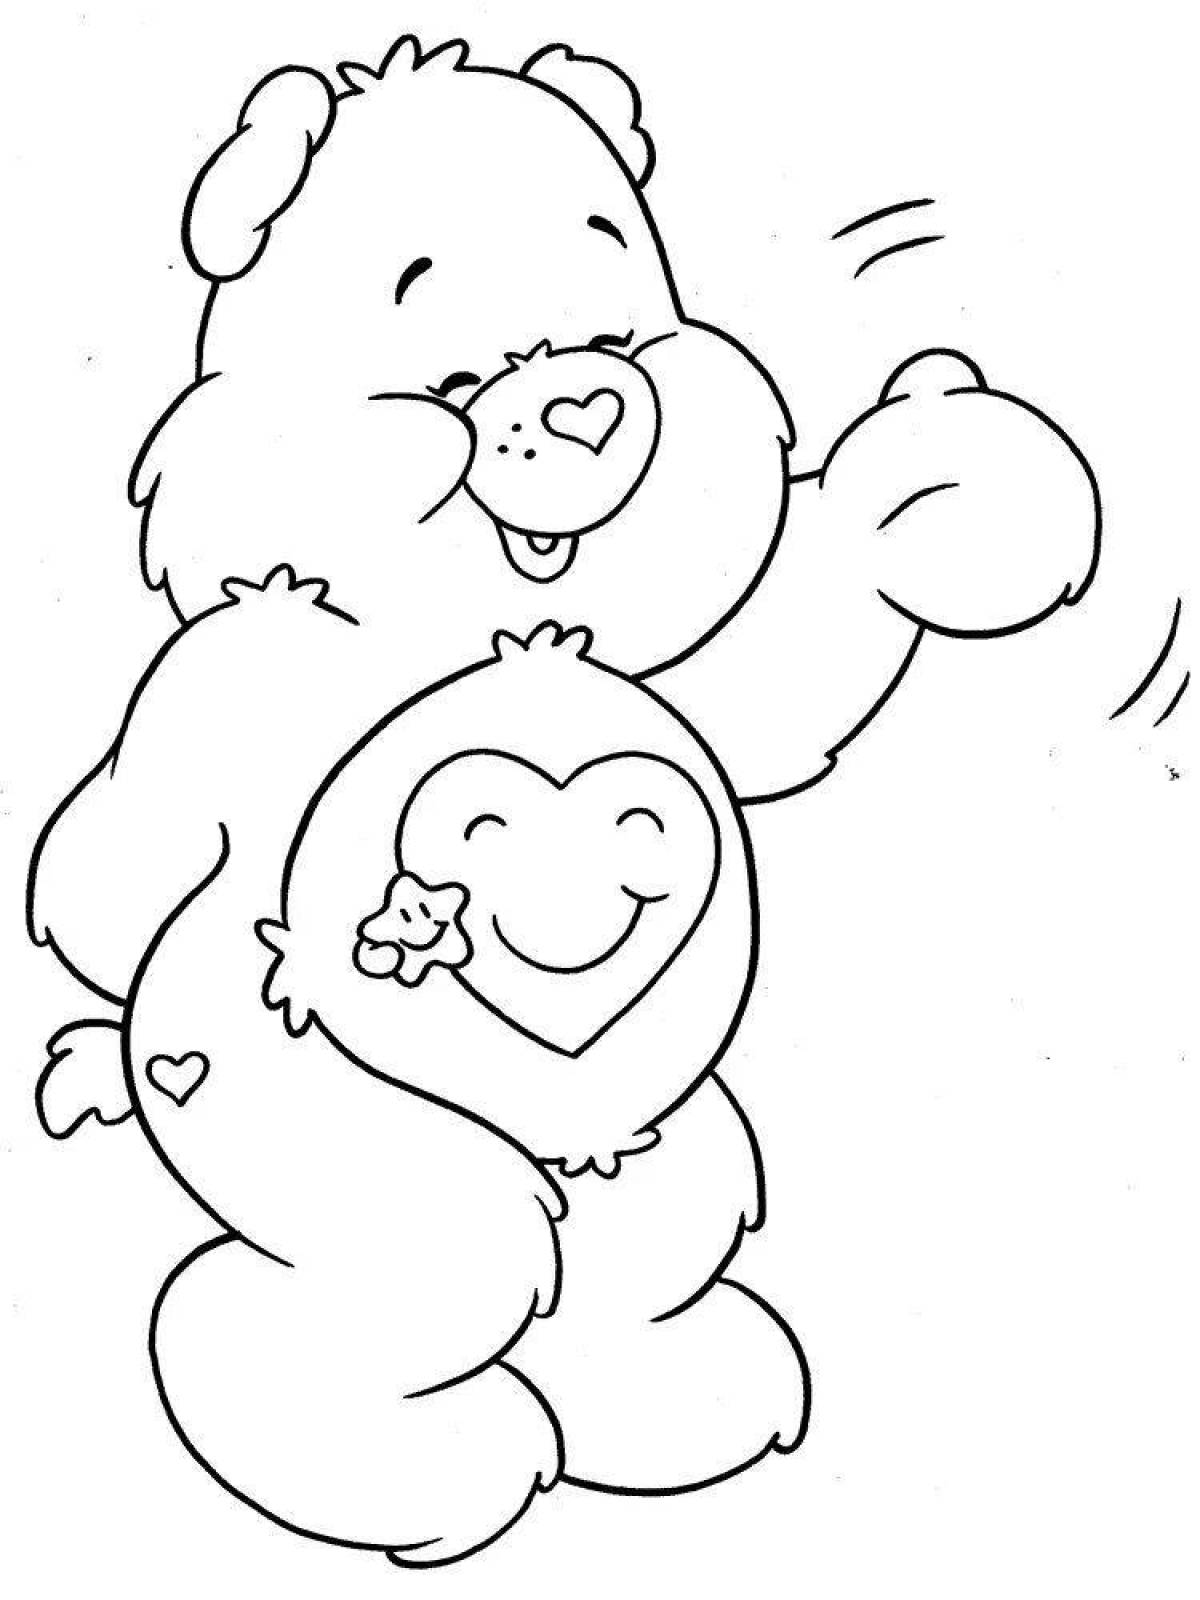 Coloring page adorable care bears